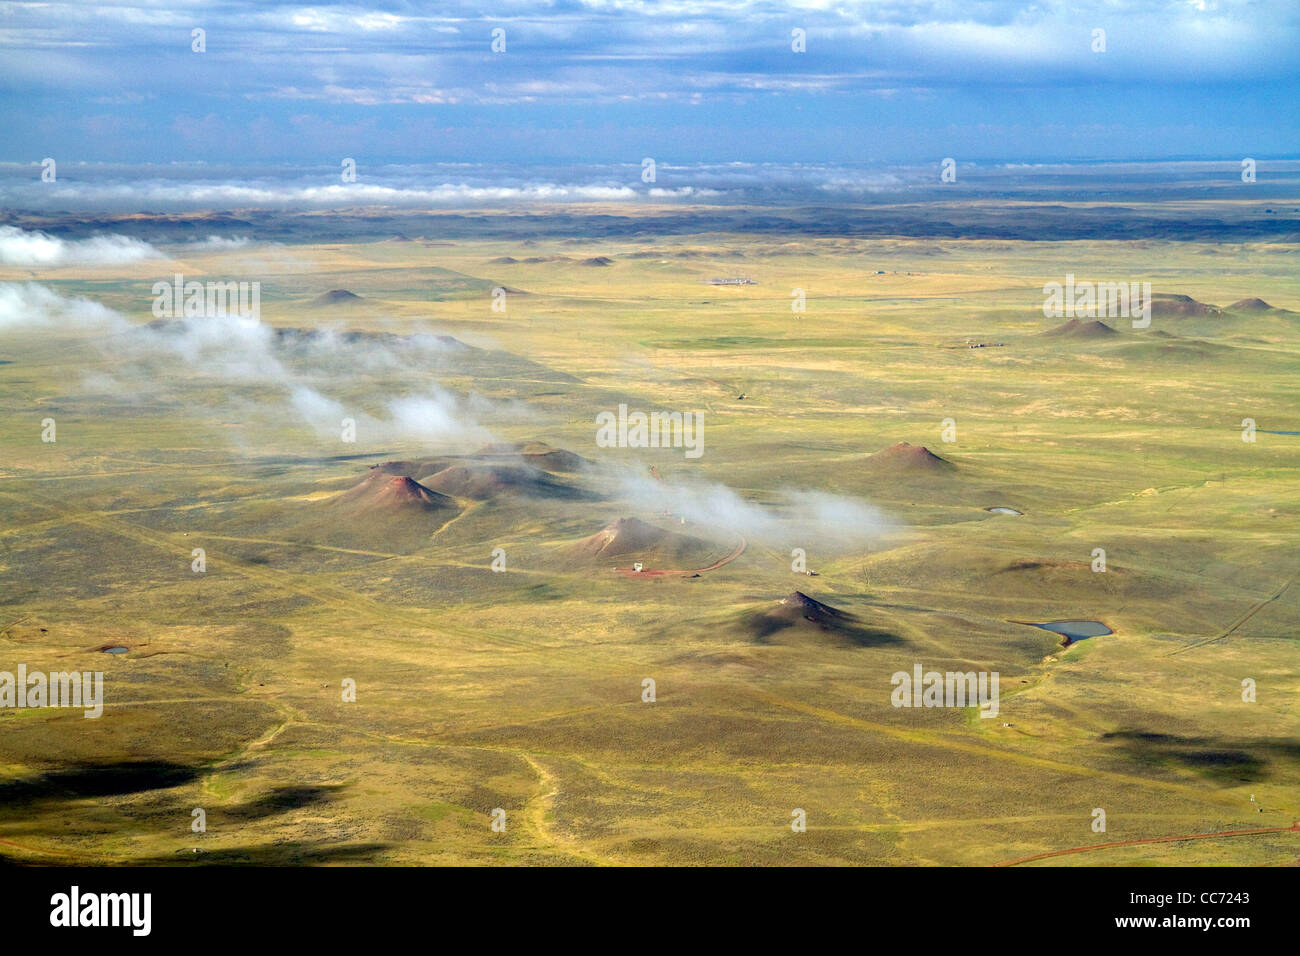 Aerial view of high plains desert near Gillette, Wyoming, USA. Stock Photo